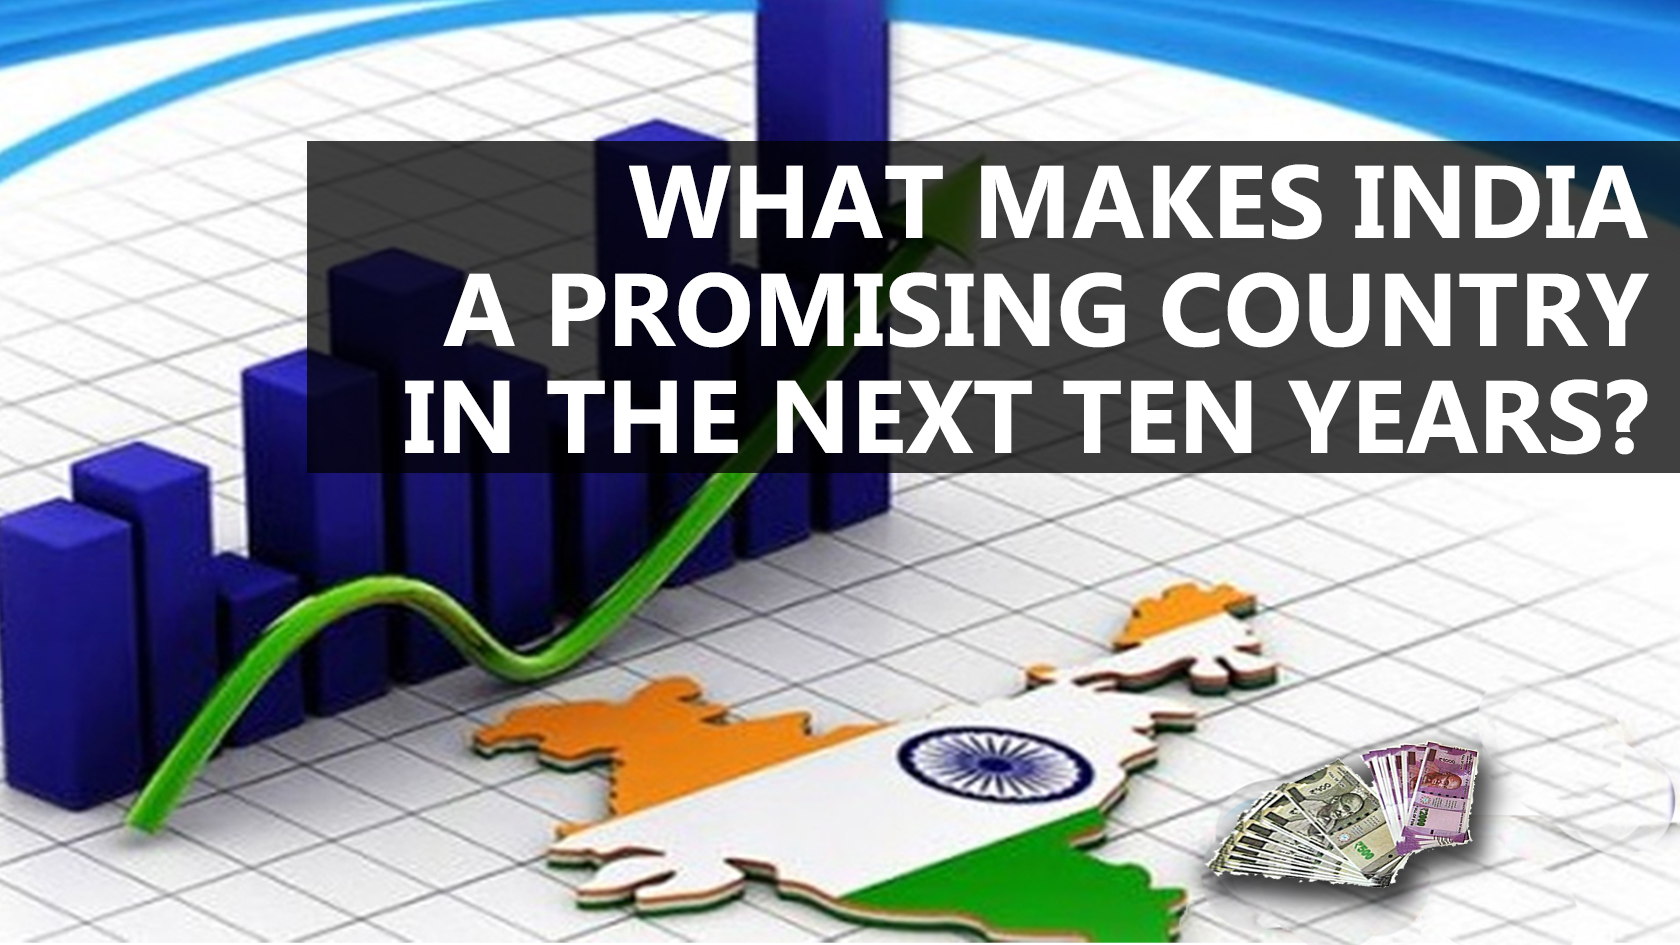 What makes India a promising country in the next ten years?